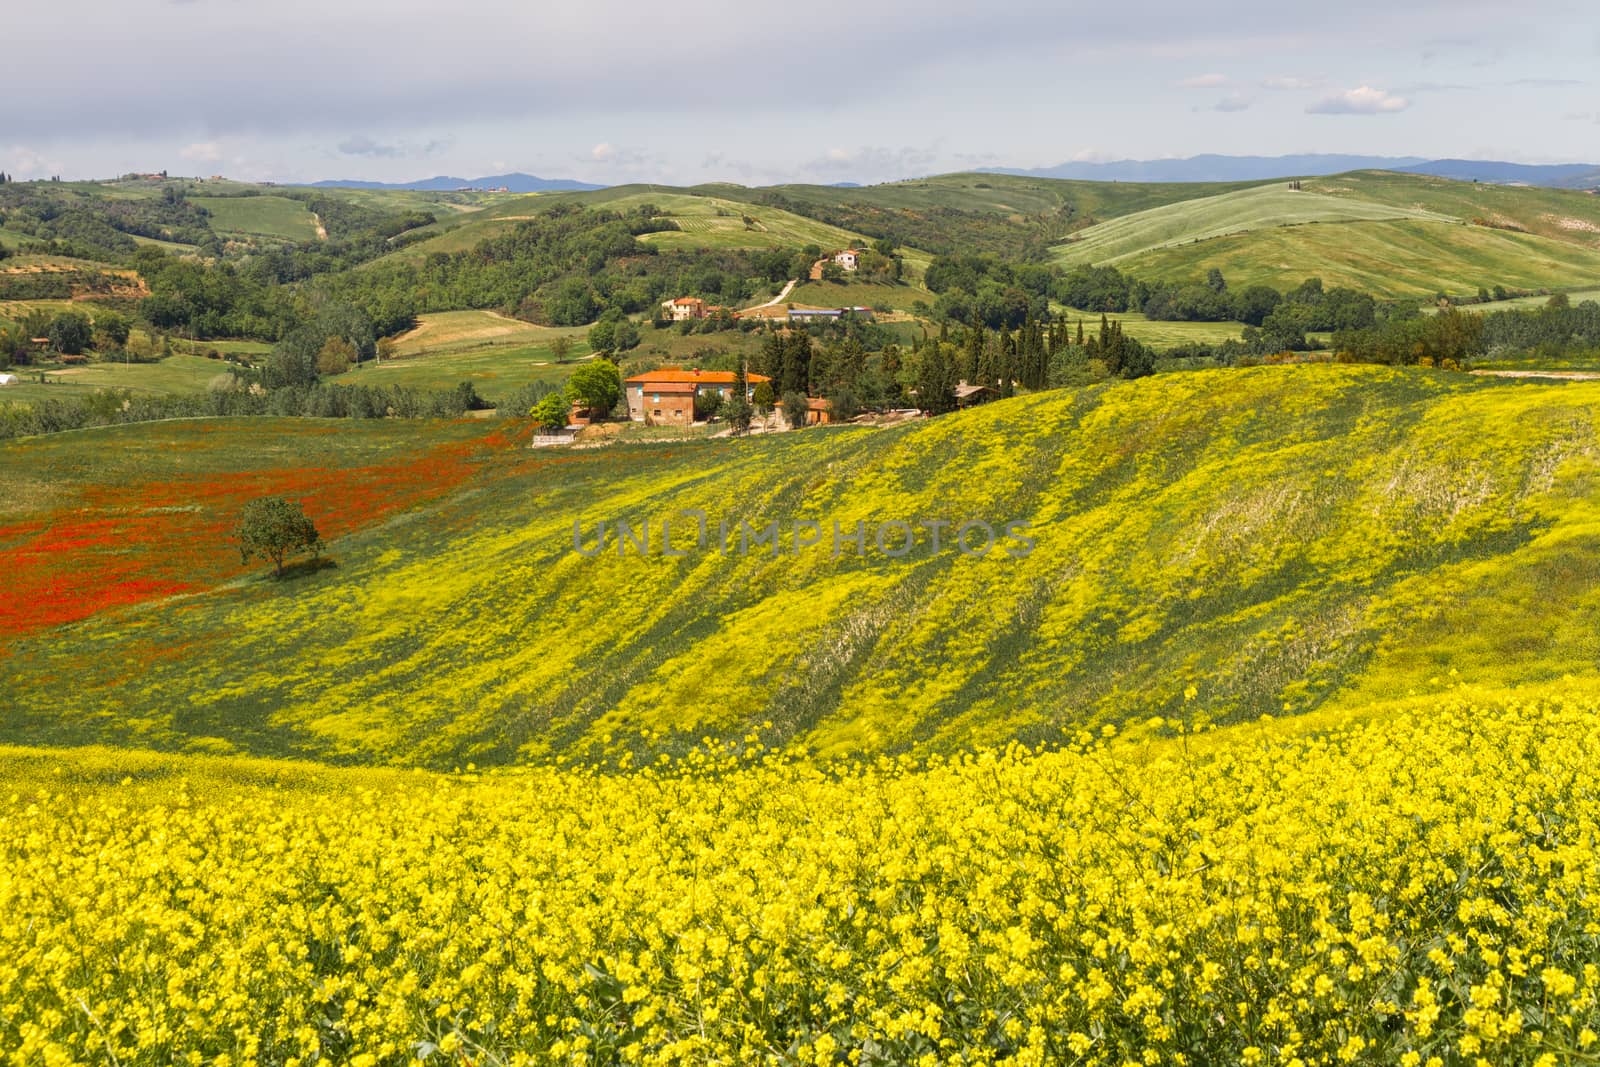 Tuscany landscape with blooming rapeseed near Siena, Italy